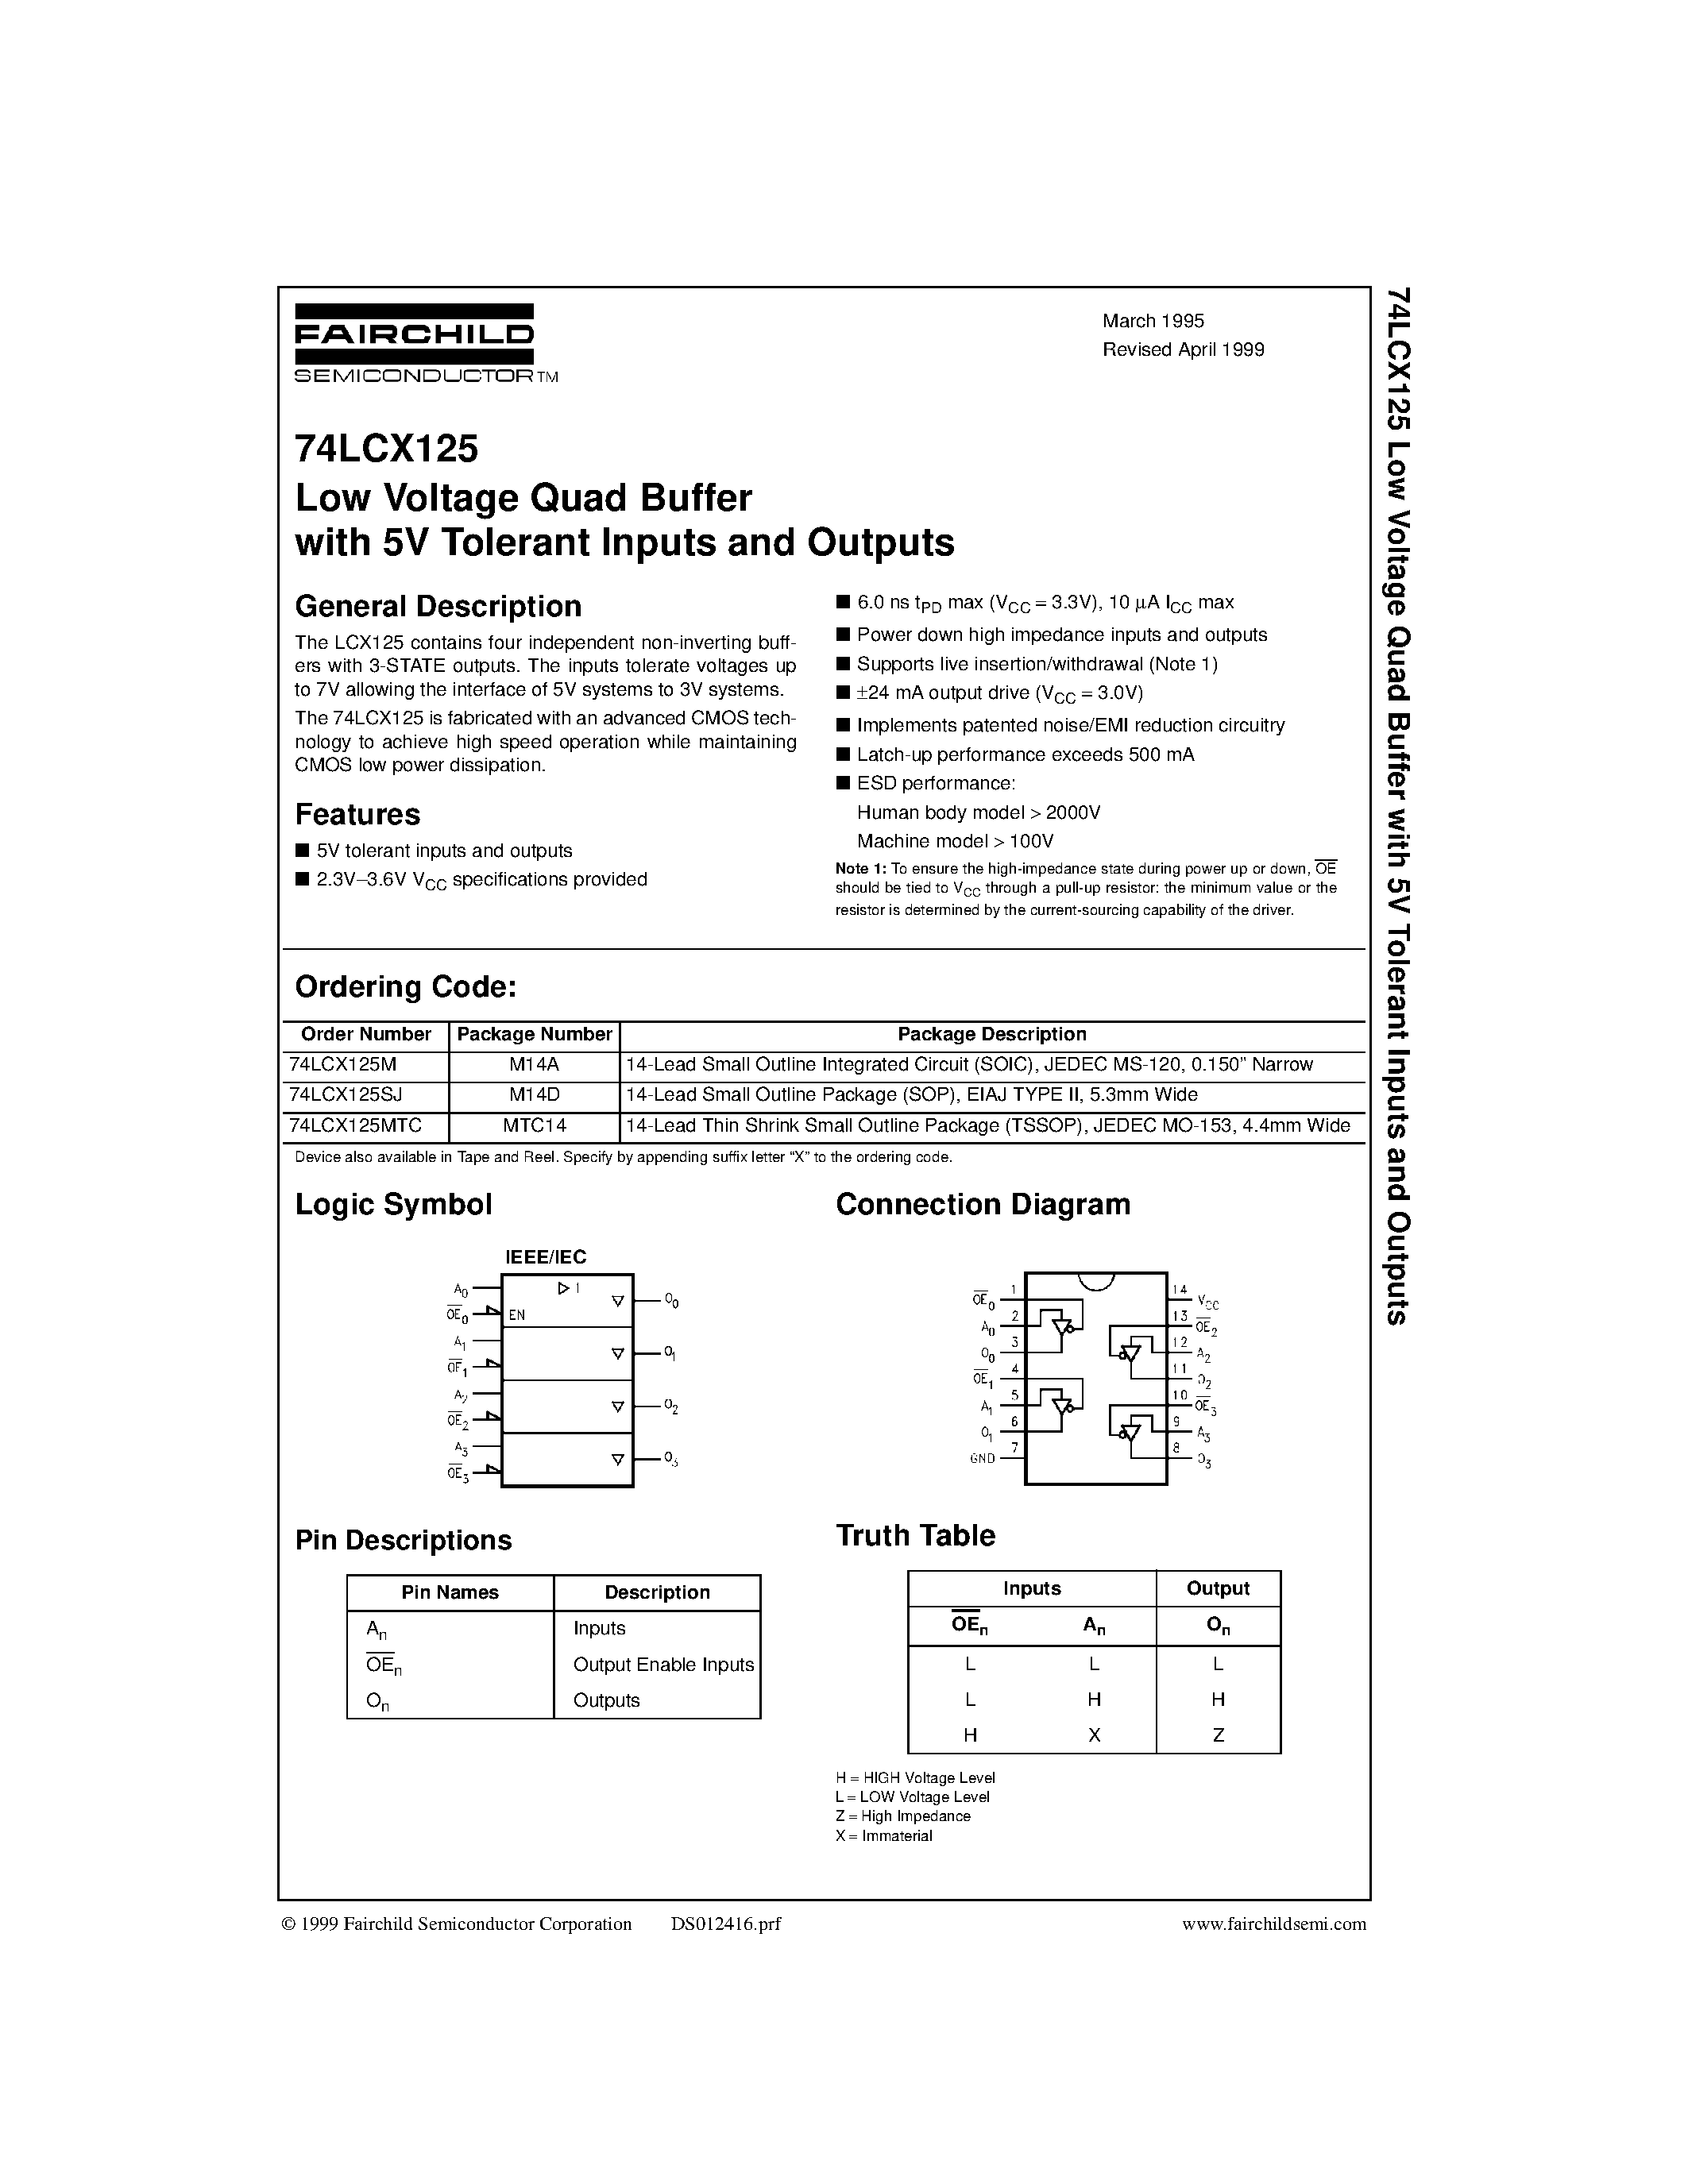 Datasheet 74LCX125MTC - Low Voltage Quad Buffer with 5V Tolerant Inputs and Outputs page 1